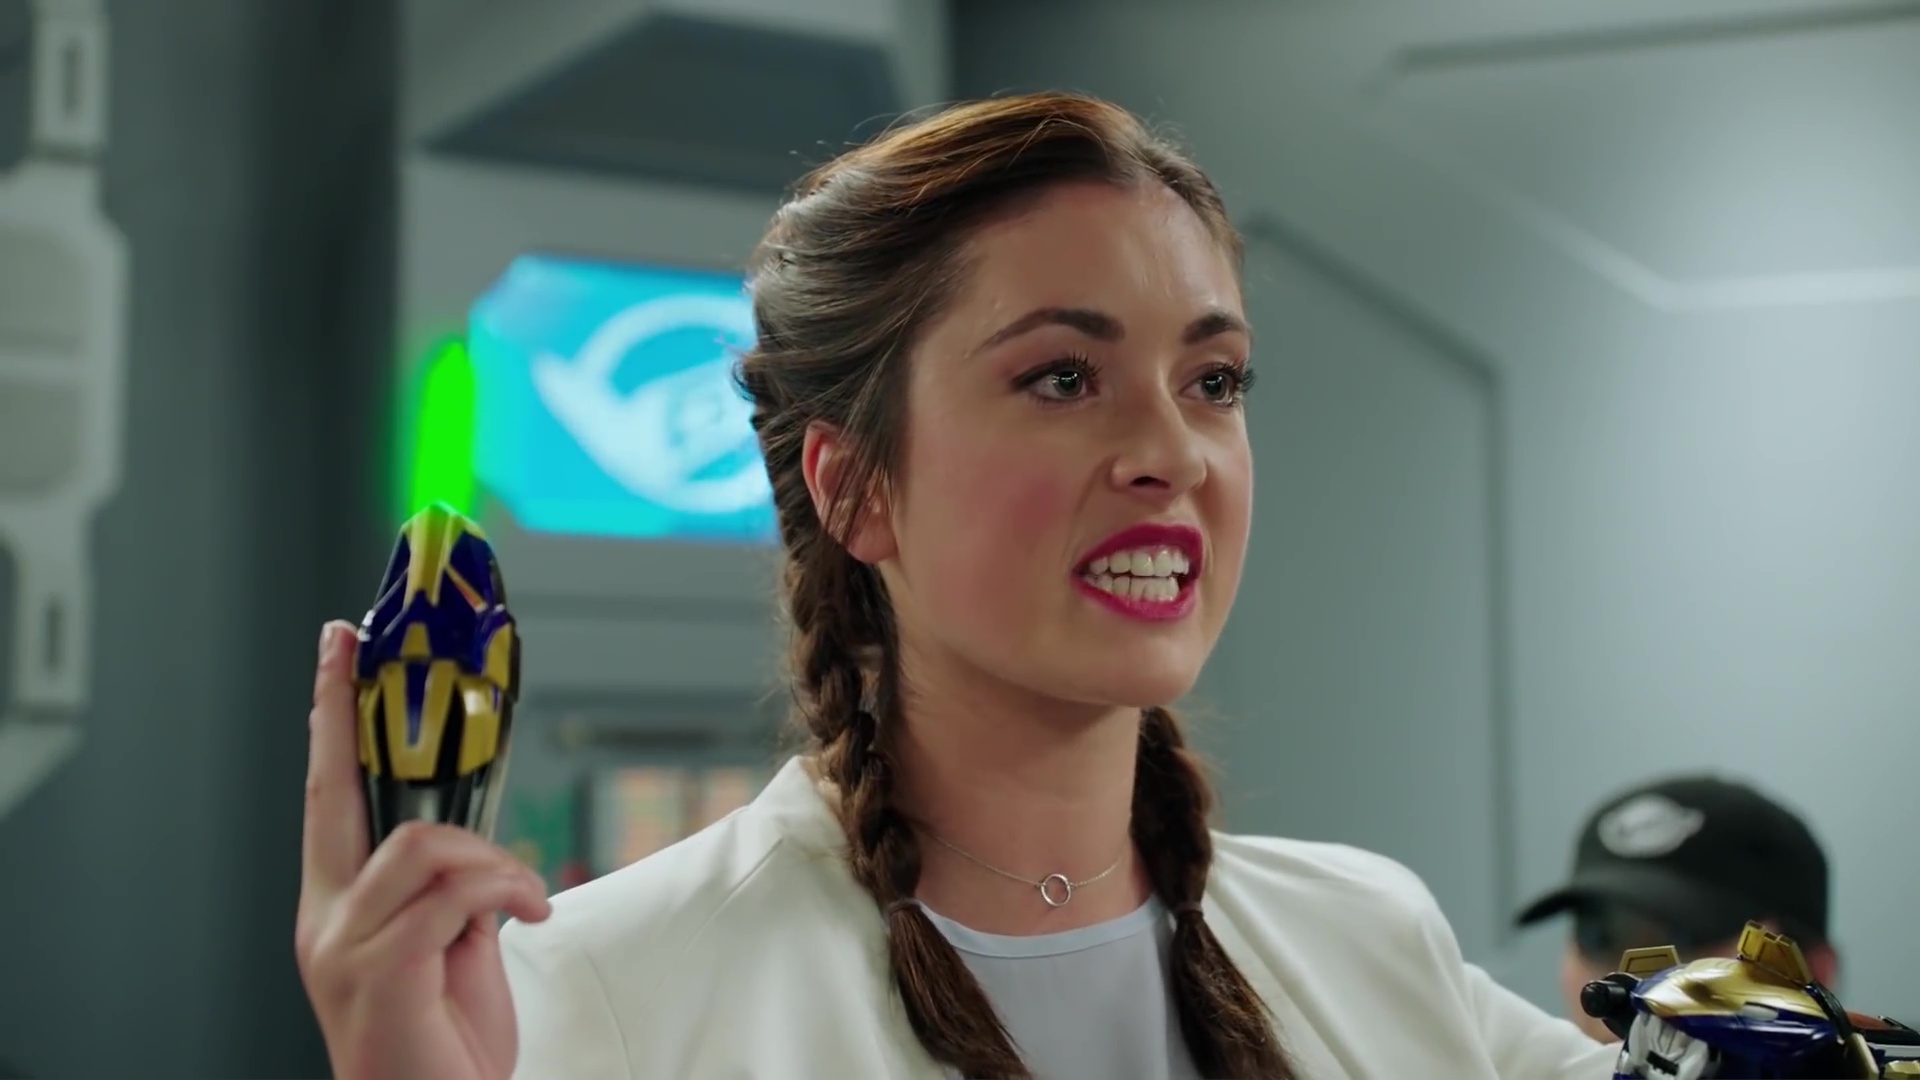 Recap: Power Rangers Beast Morphers (Season 2), Episode 27 (7) – “Lions are meant to be wild.”